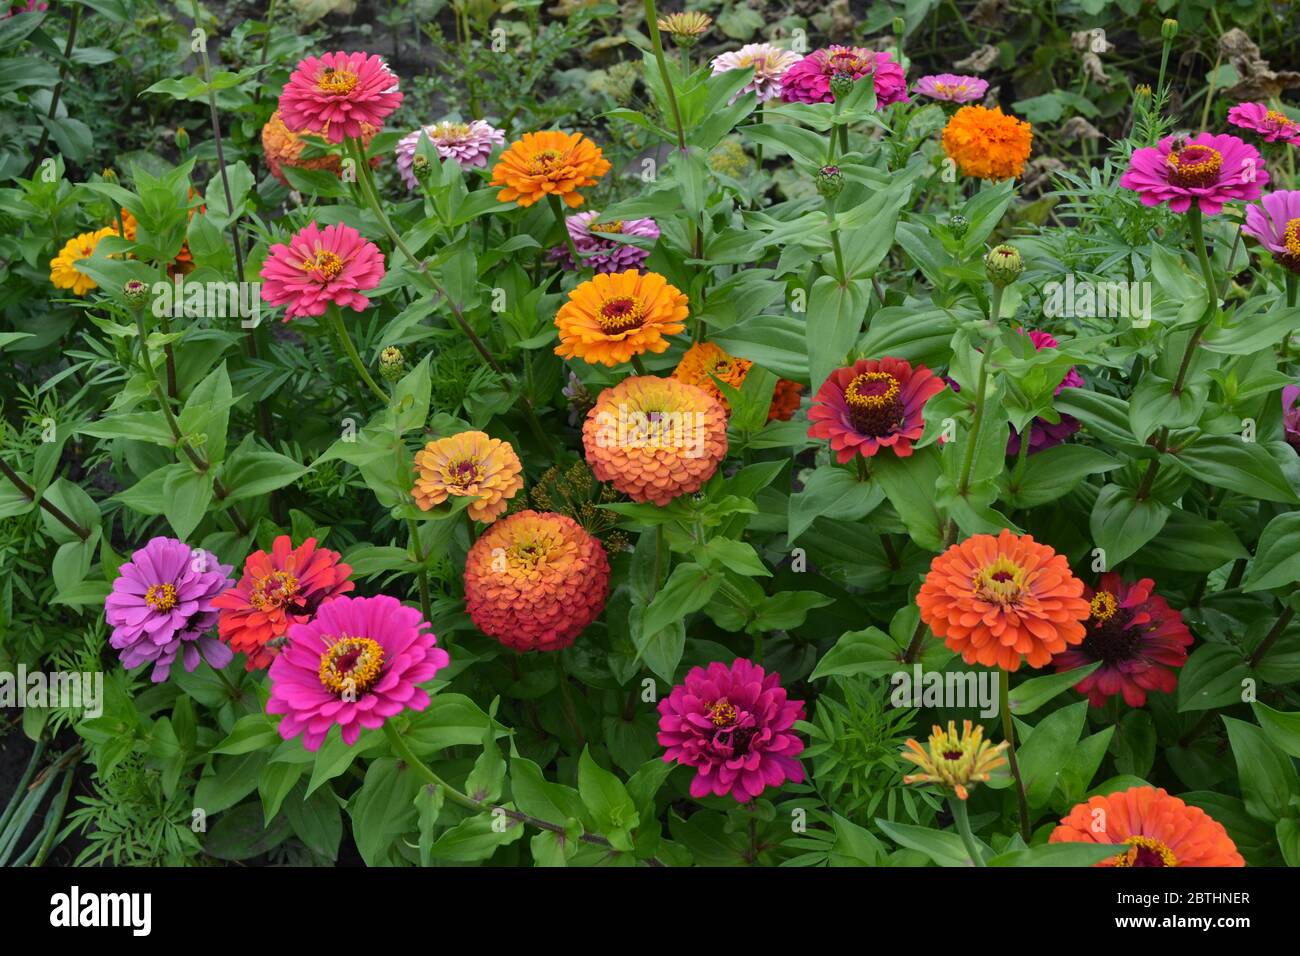 Zinnia A Genus Of Annual And Perennial Grasses And Dwarf Shrubs Of The Asteraceae Family Flower Zinnia Gardening Red Flowers Stock Photo Alamy